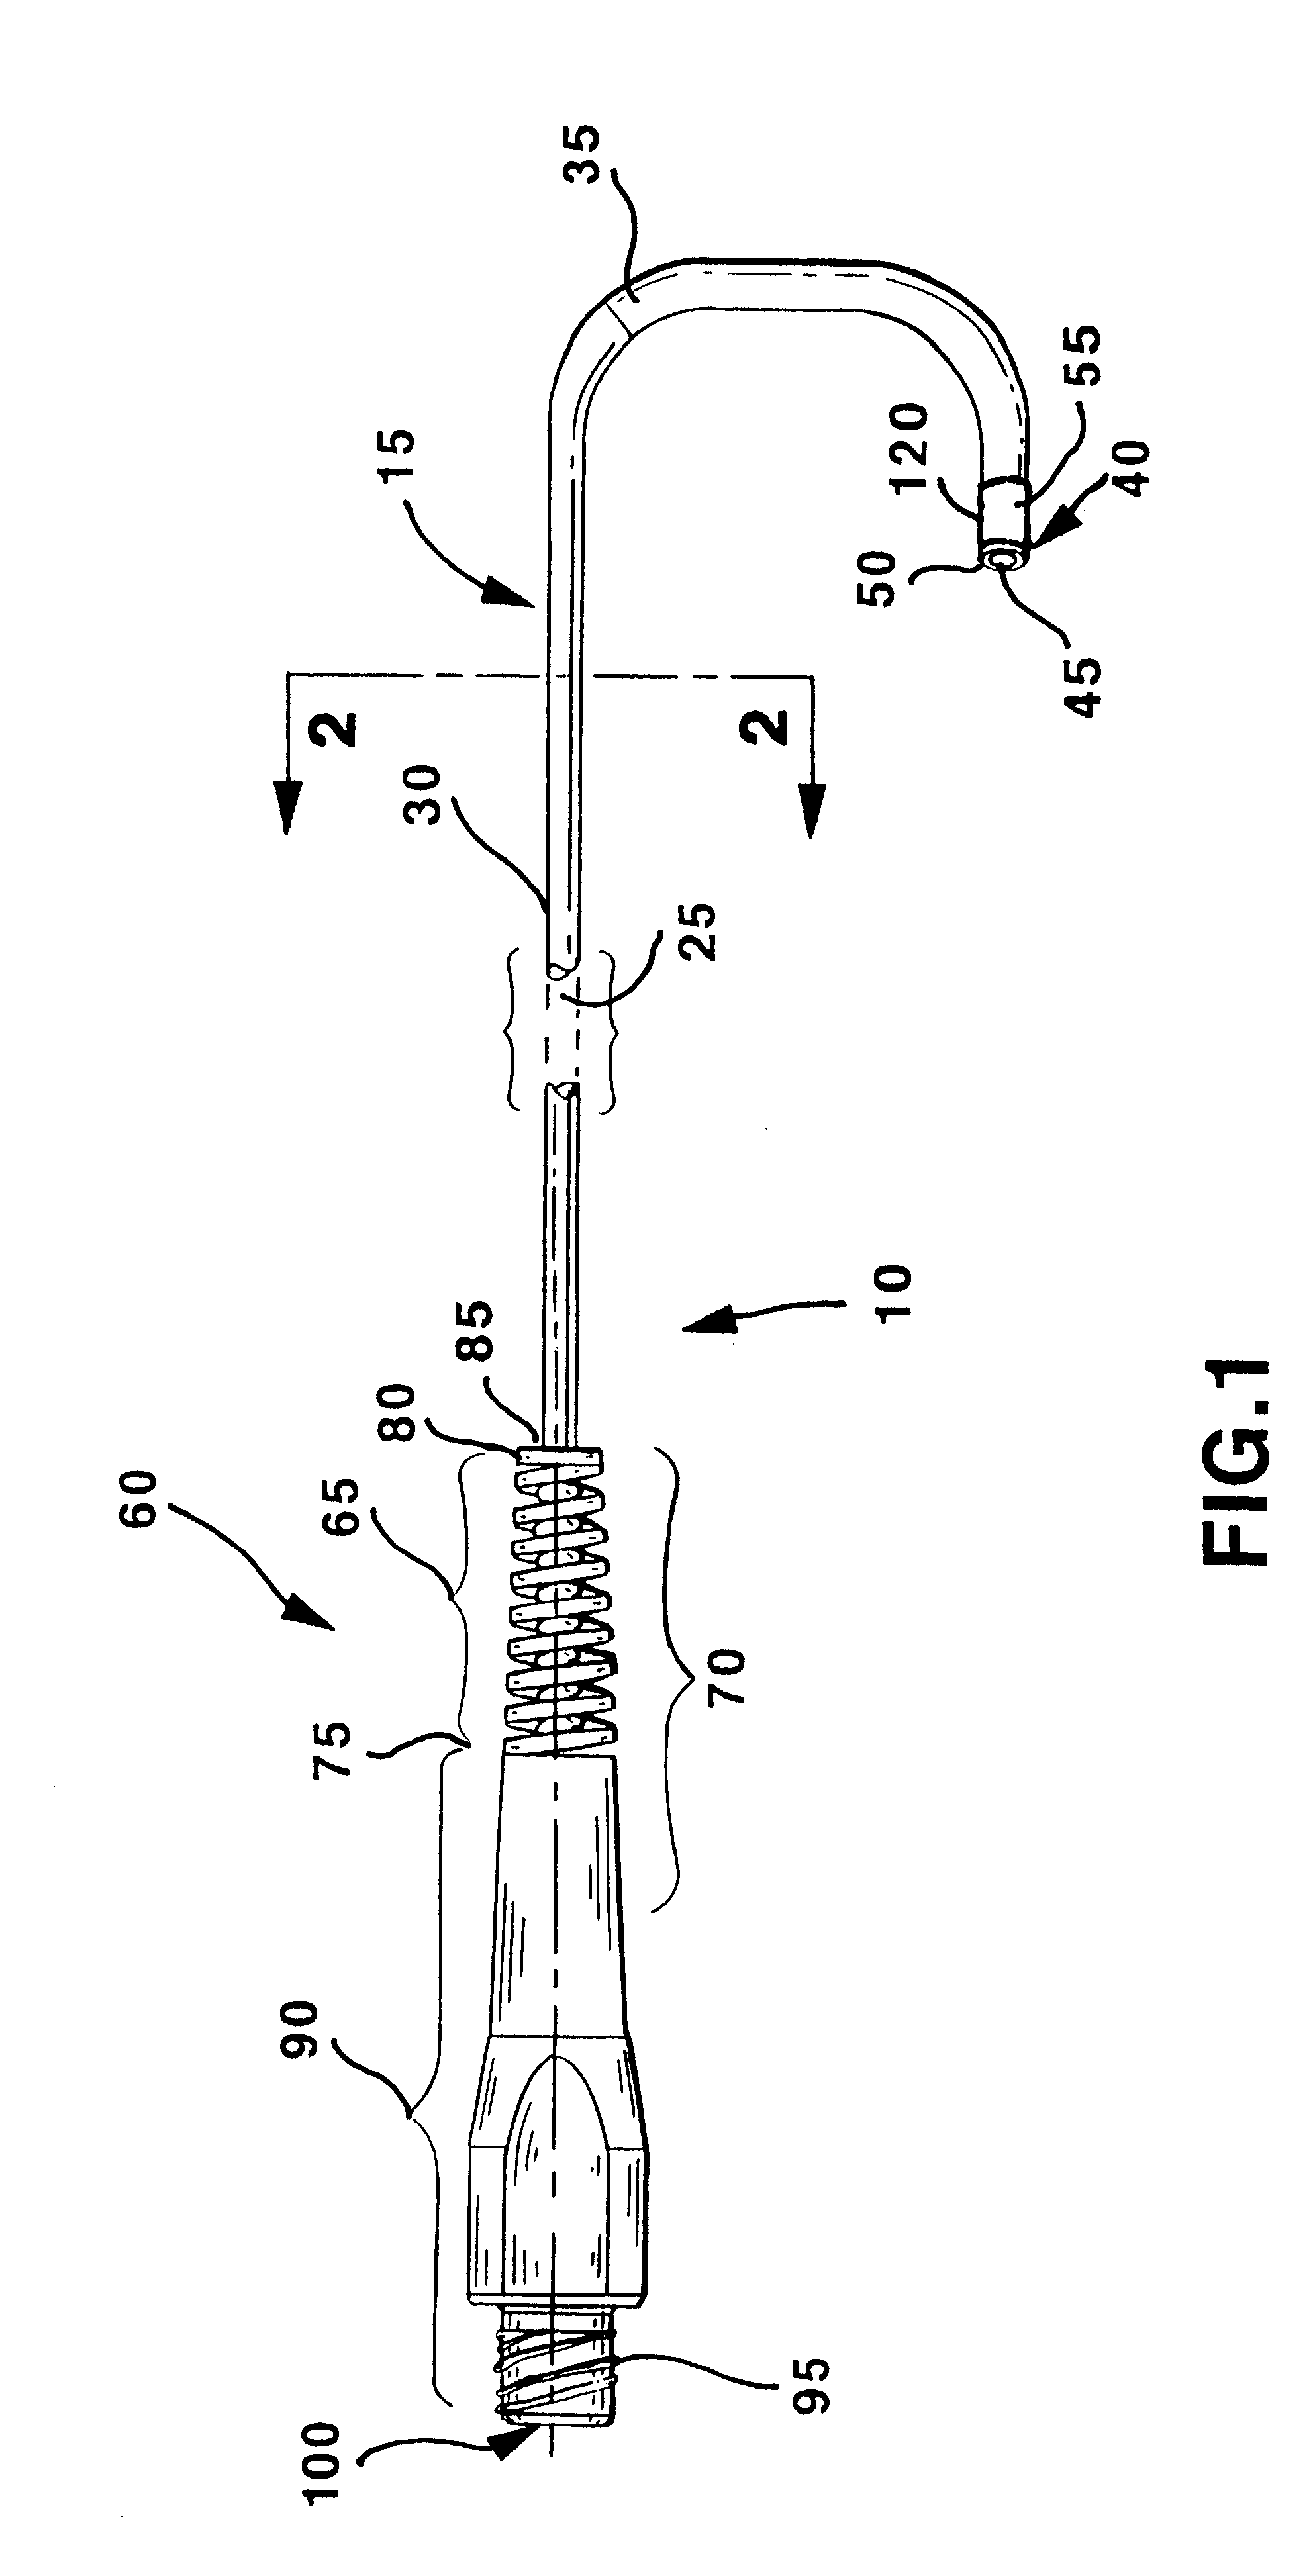 Soft tip guiding catheter and method of fabrication